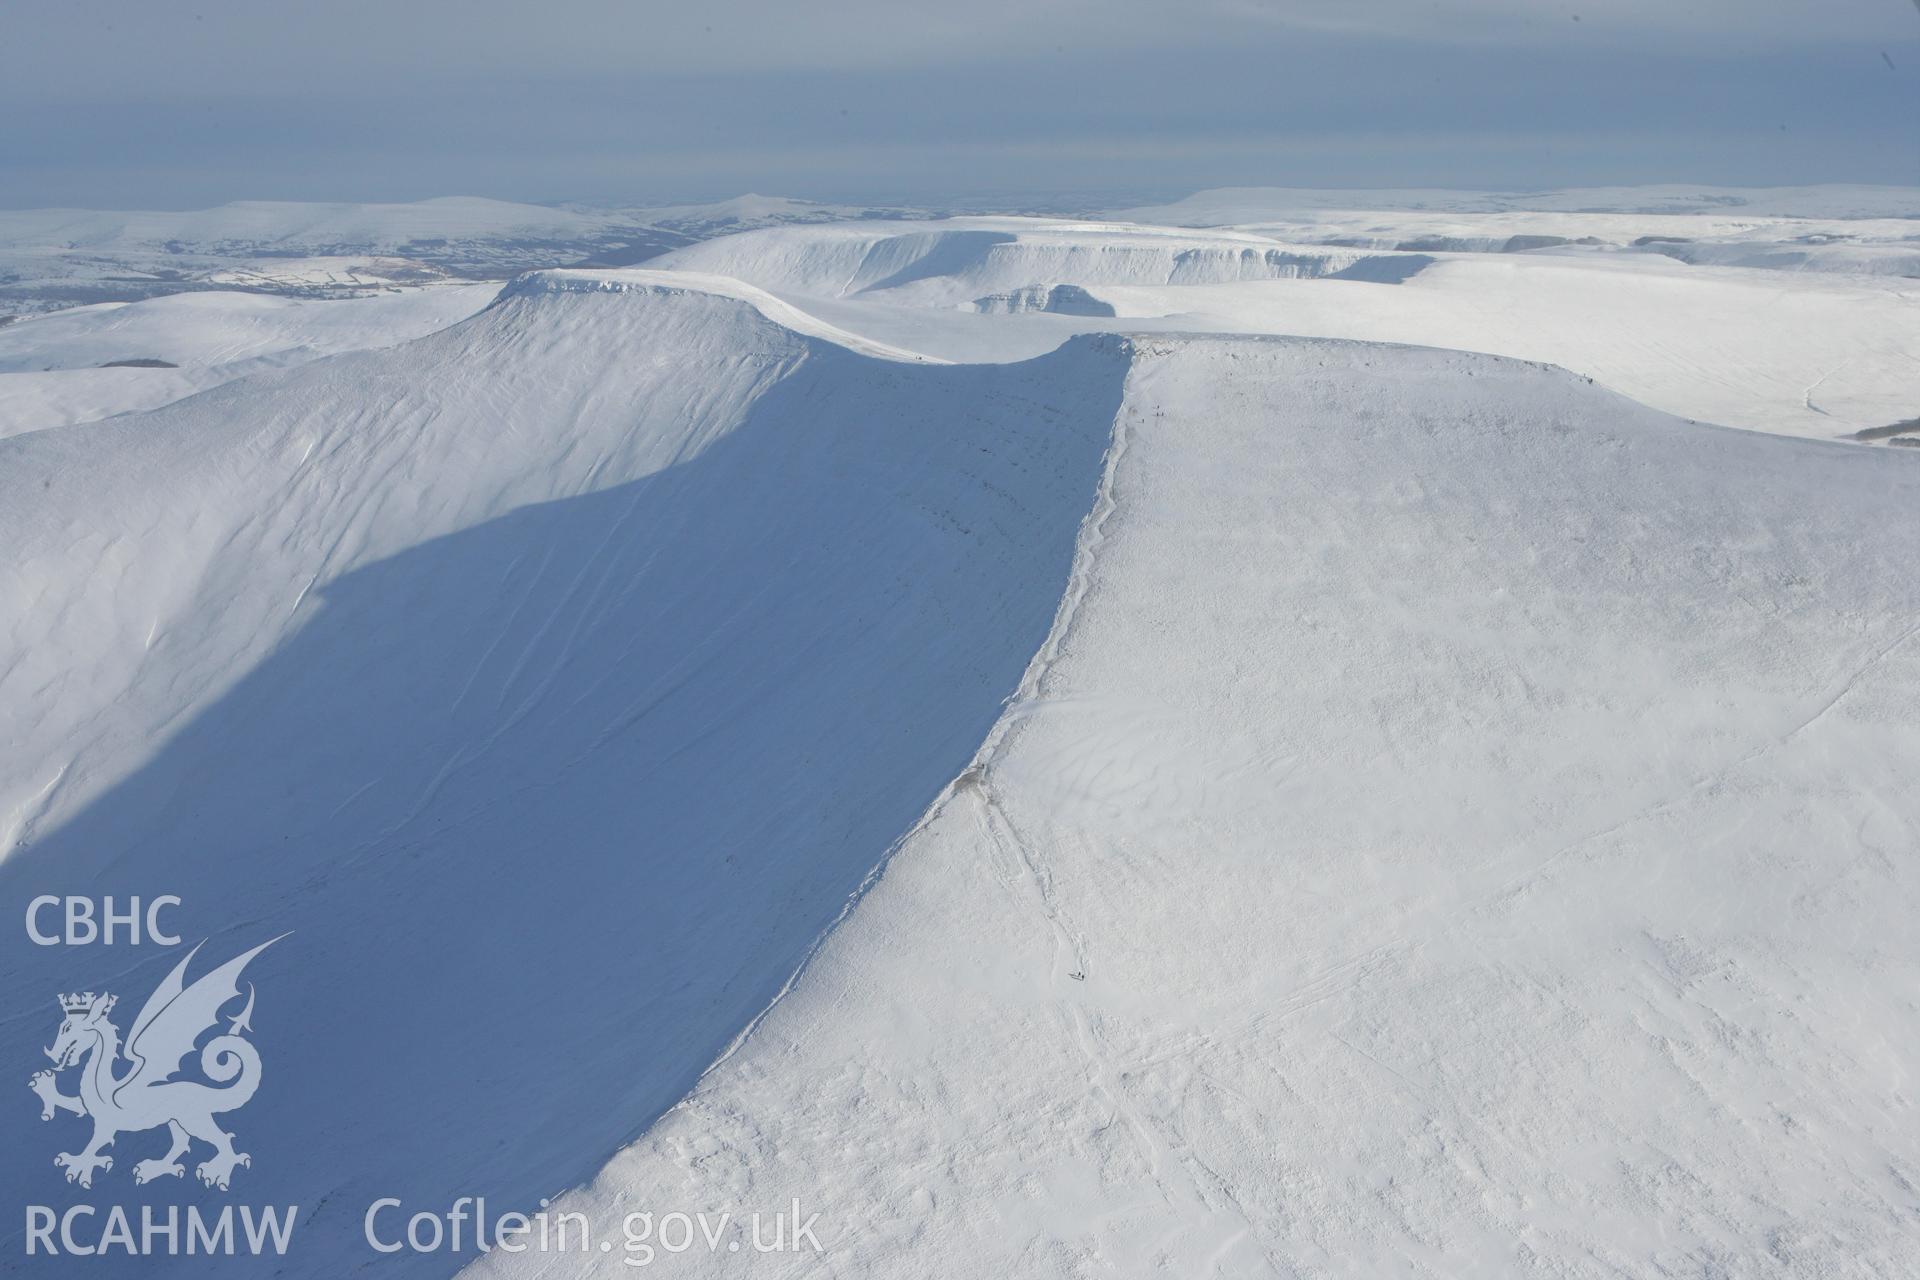 RCAHMW colour oblique photograph of the Brecon Beacons and Pen y Fan. Taken by Toby Driver on 06/02/2009.